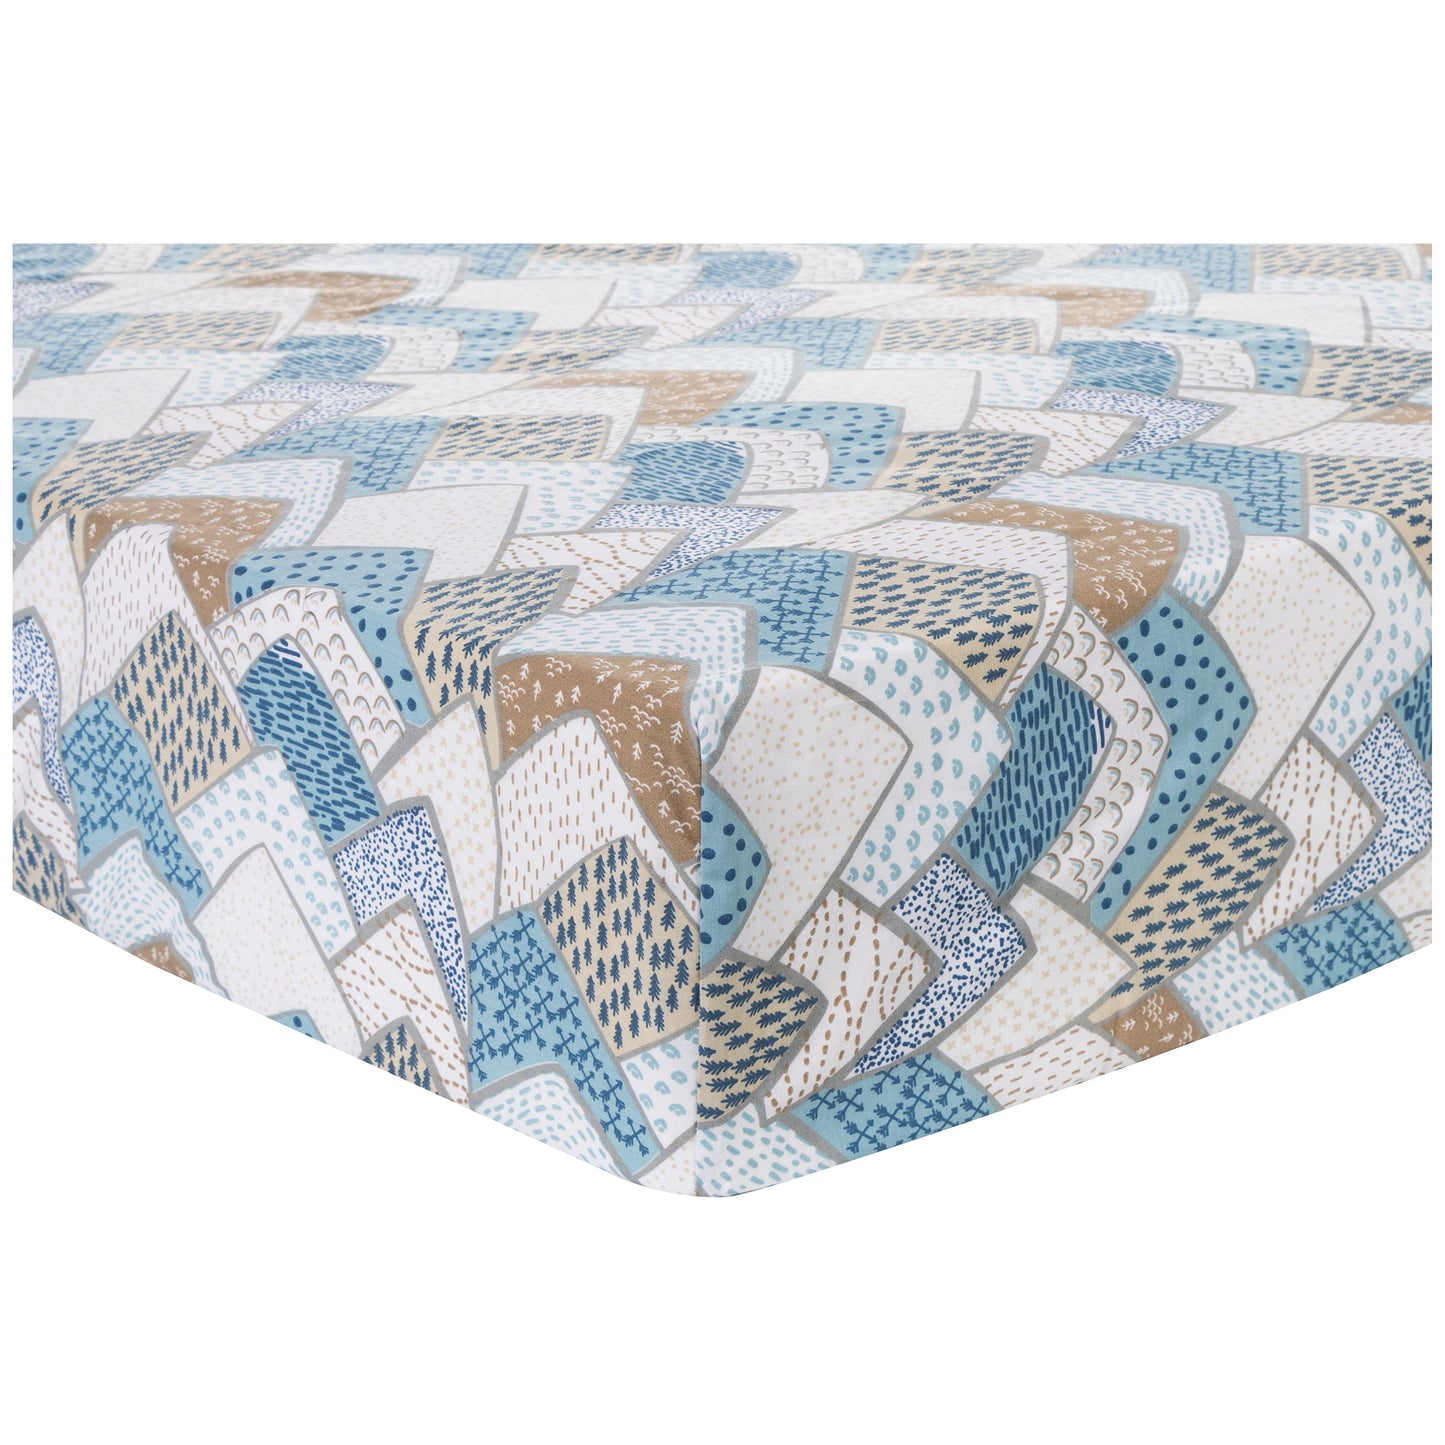 Corner View of Crib Sheet that features a multi-pattern mountain print.